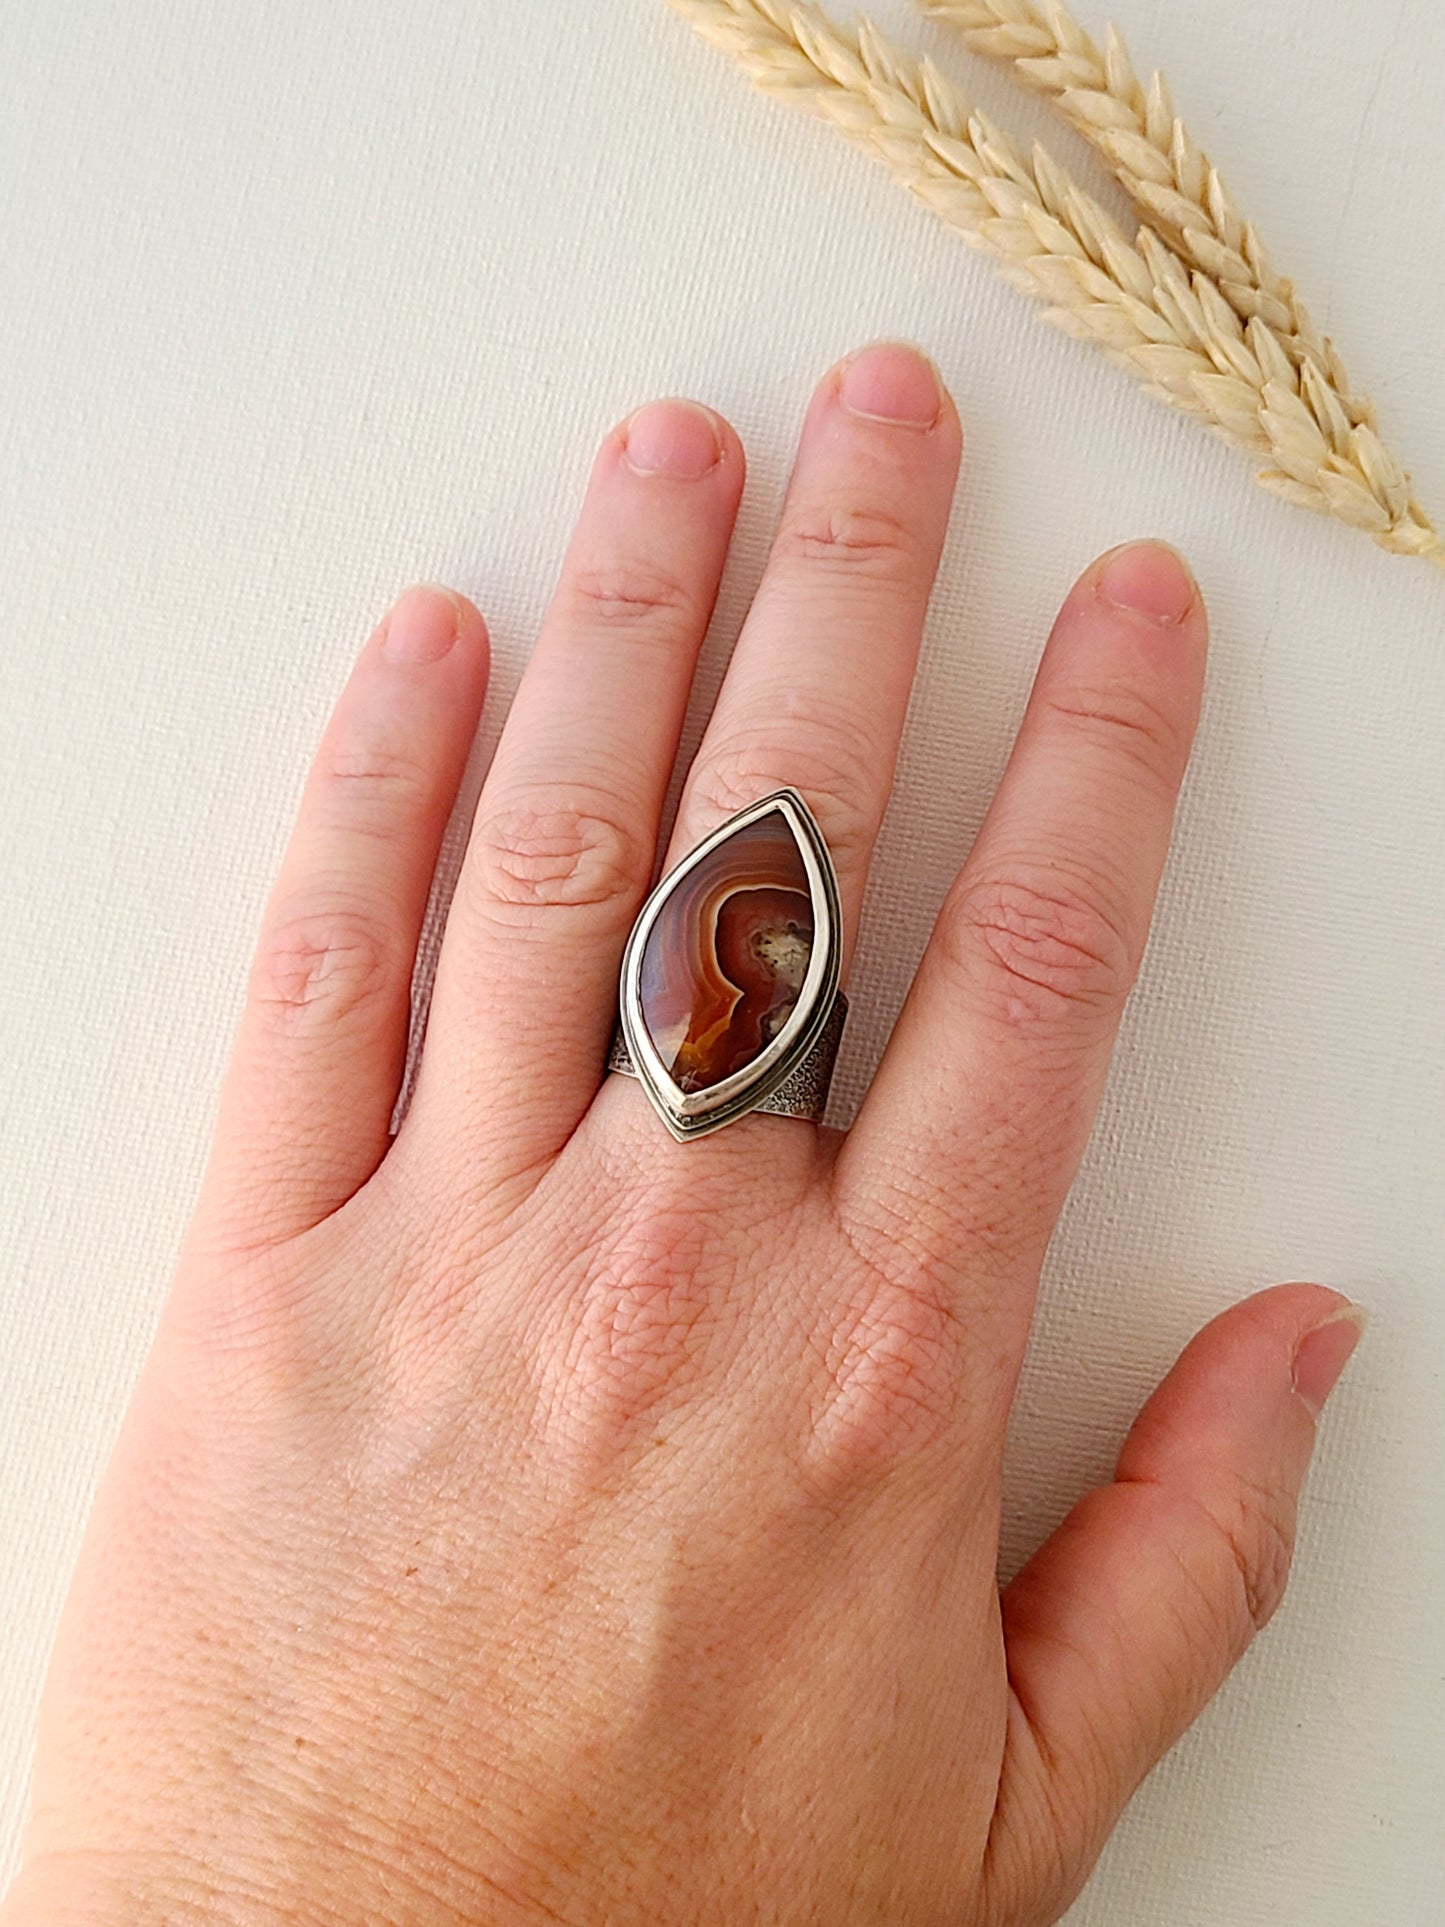 Canyon ring with Laguna Lace agate-size 9 US